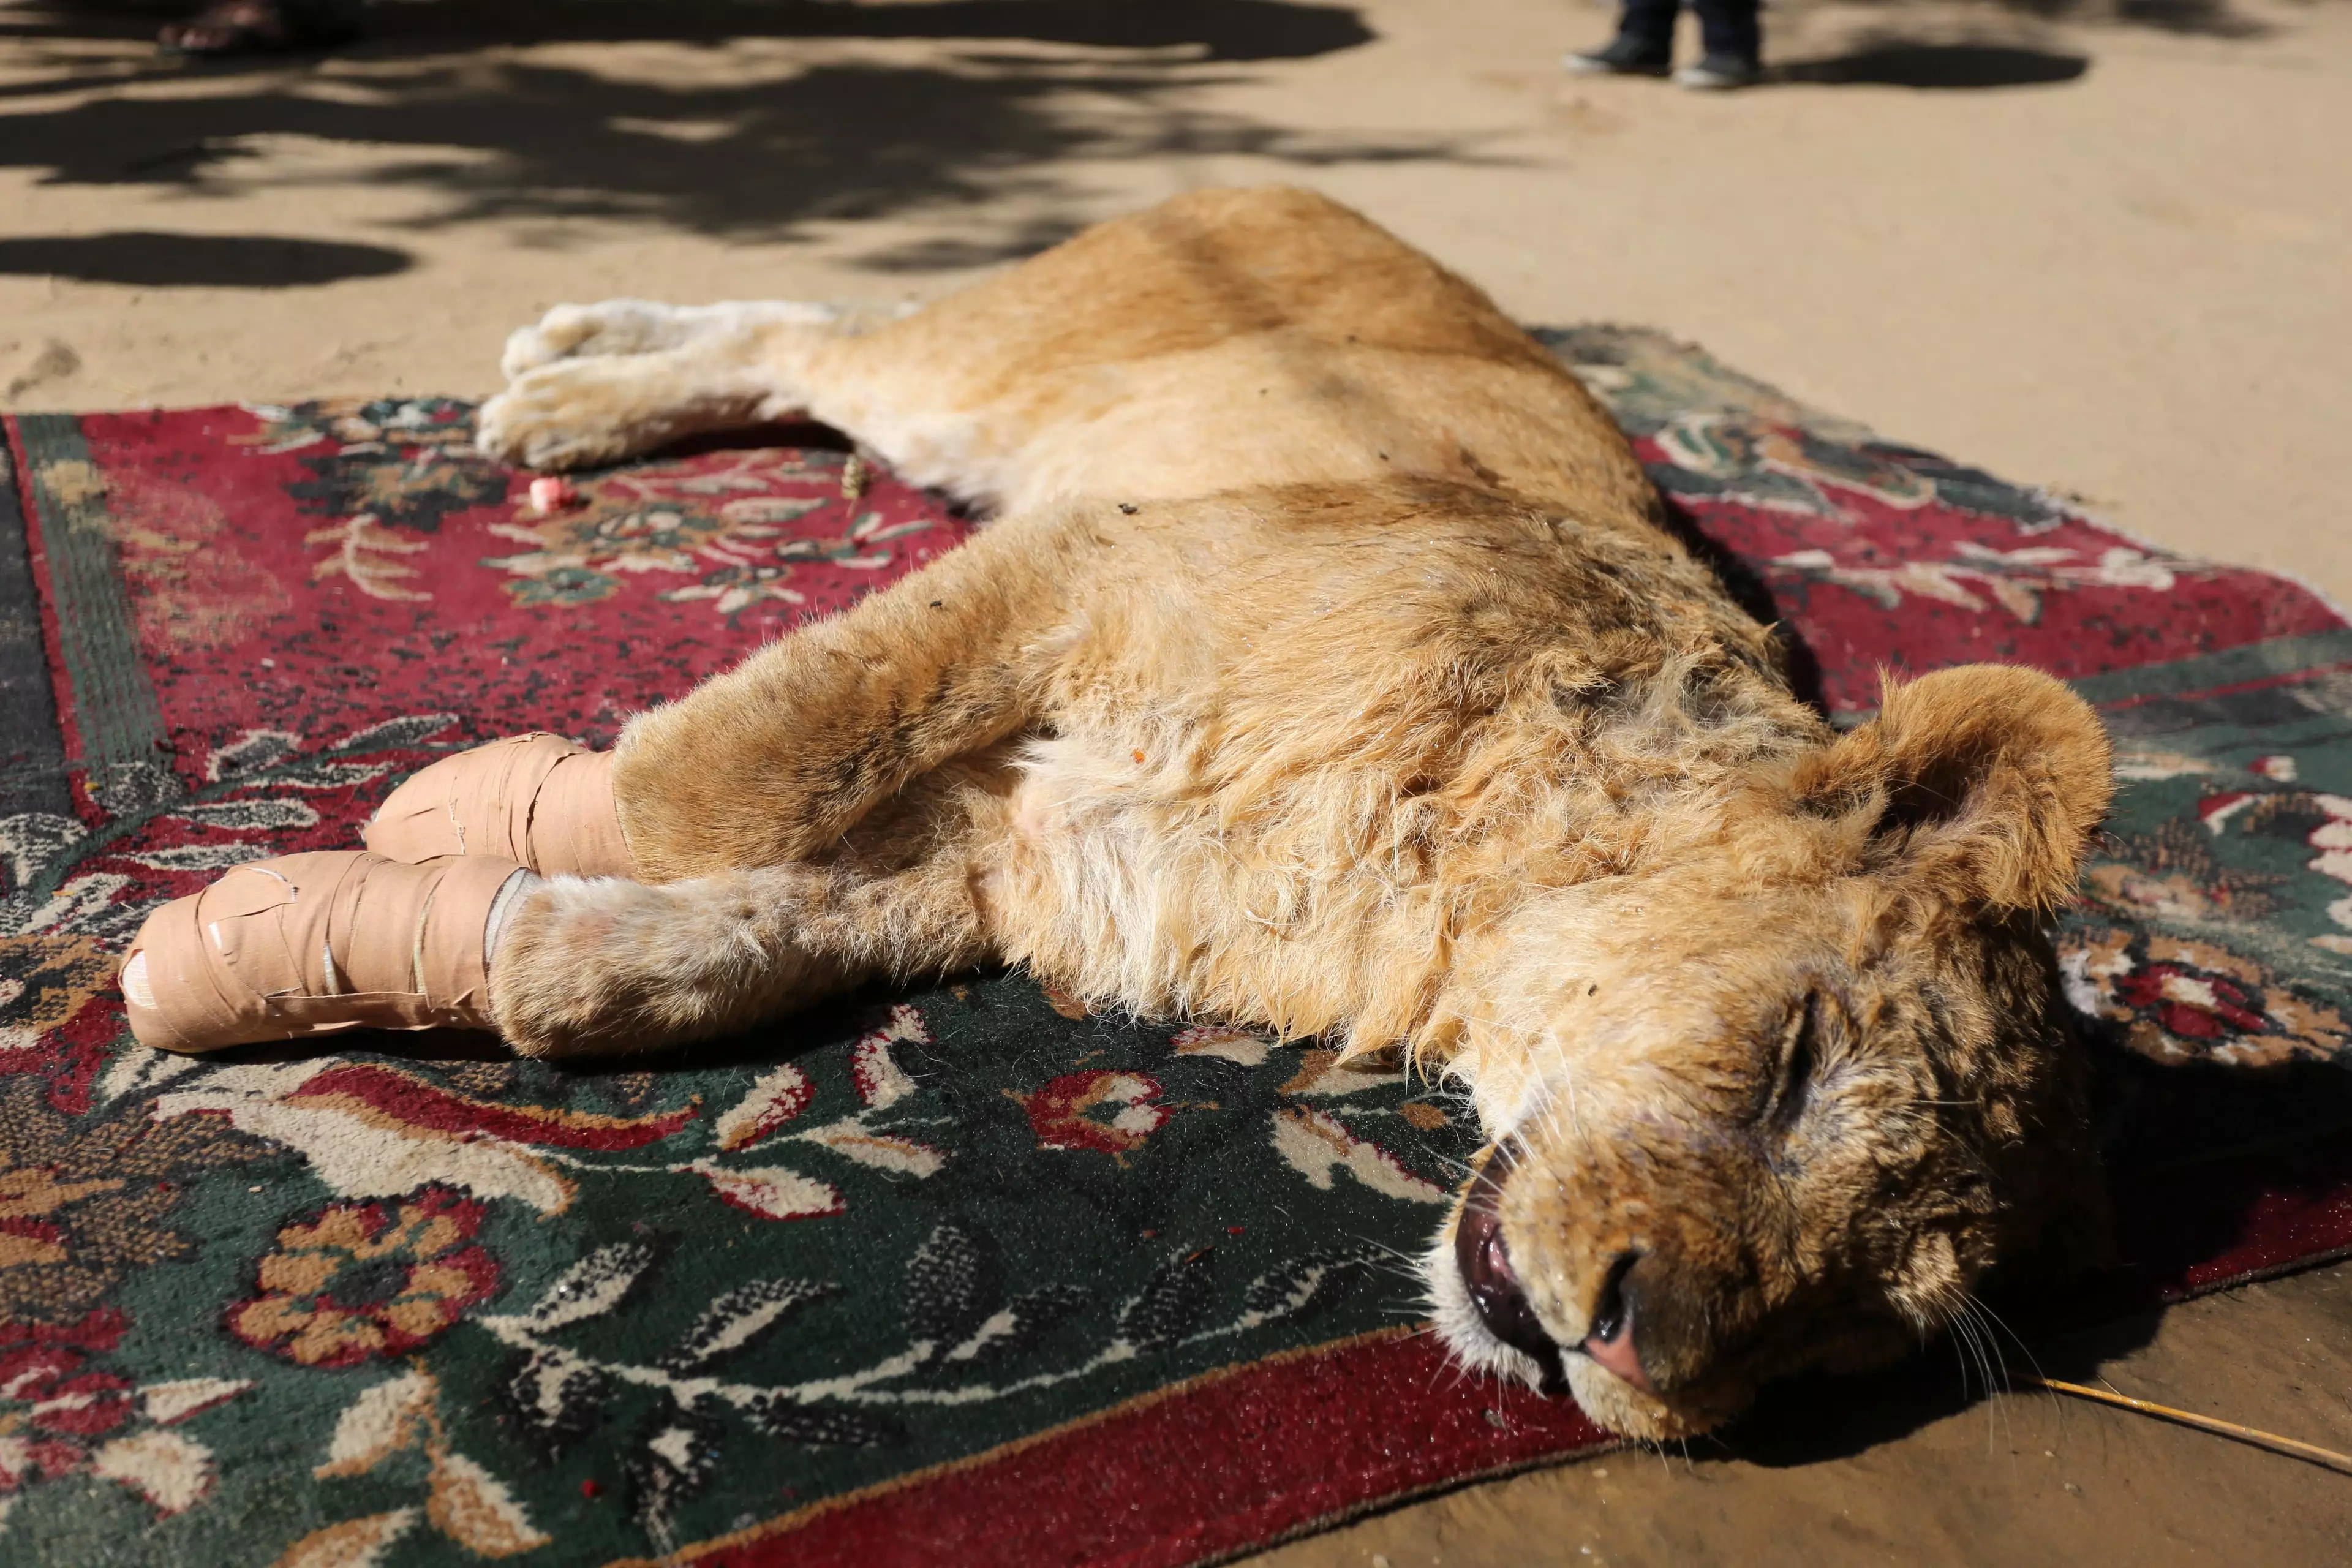 The lioness can be seen lying on the floor with bandages around her front paws.